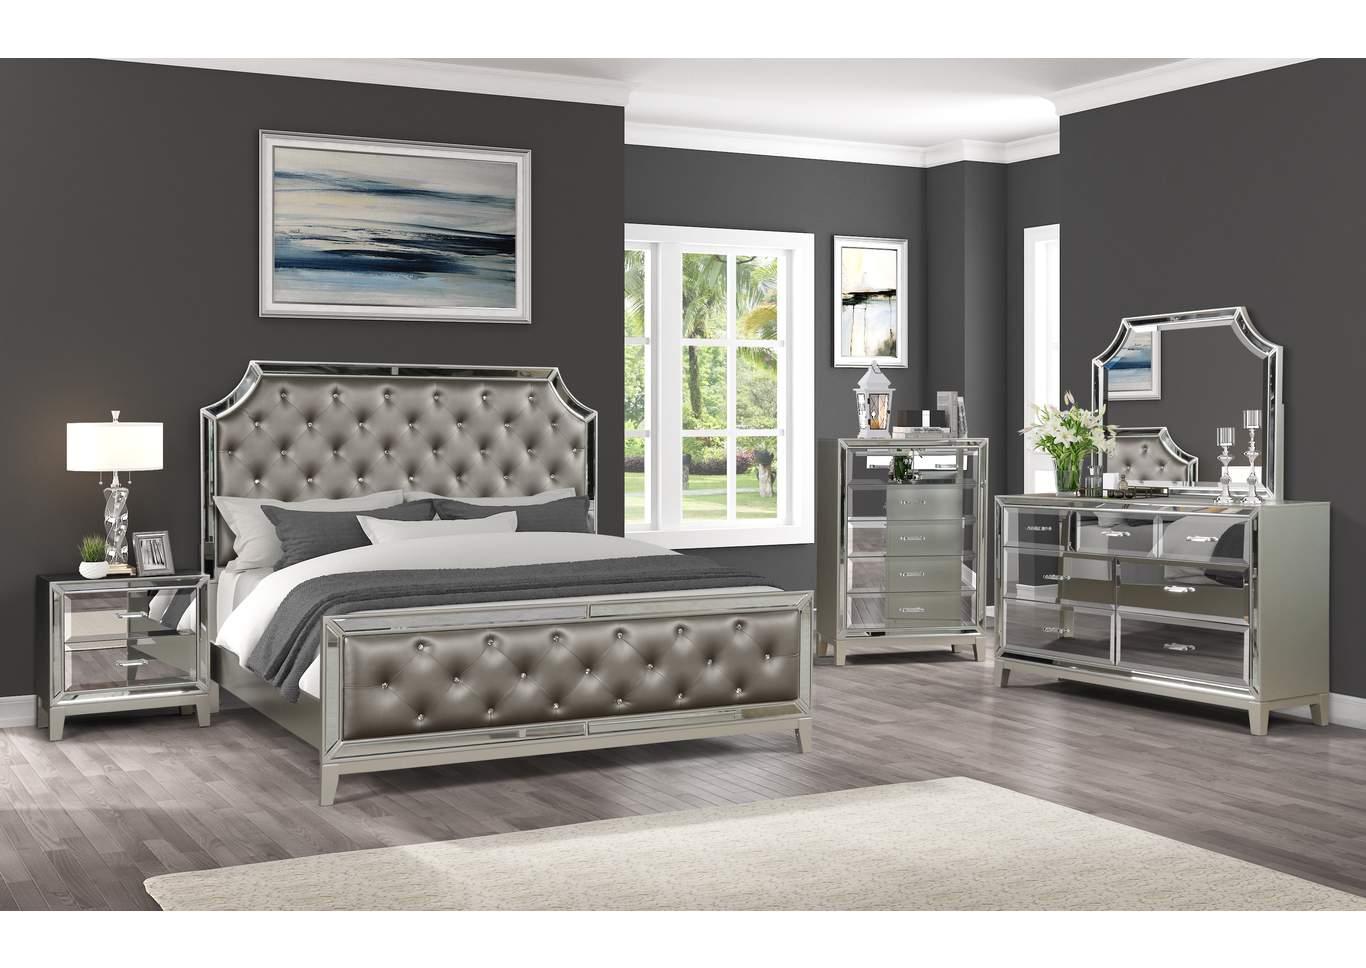 Contemporary, Modern Panel Bedroom Set HARMONY GHF-808857605115 in Silver, Gray Eco-Leather